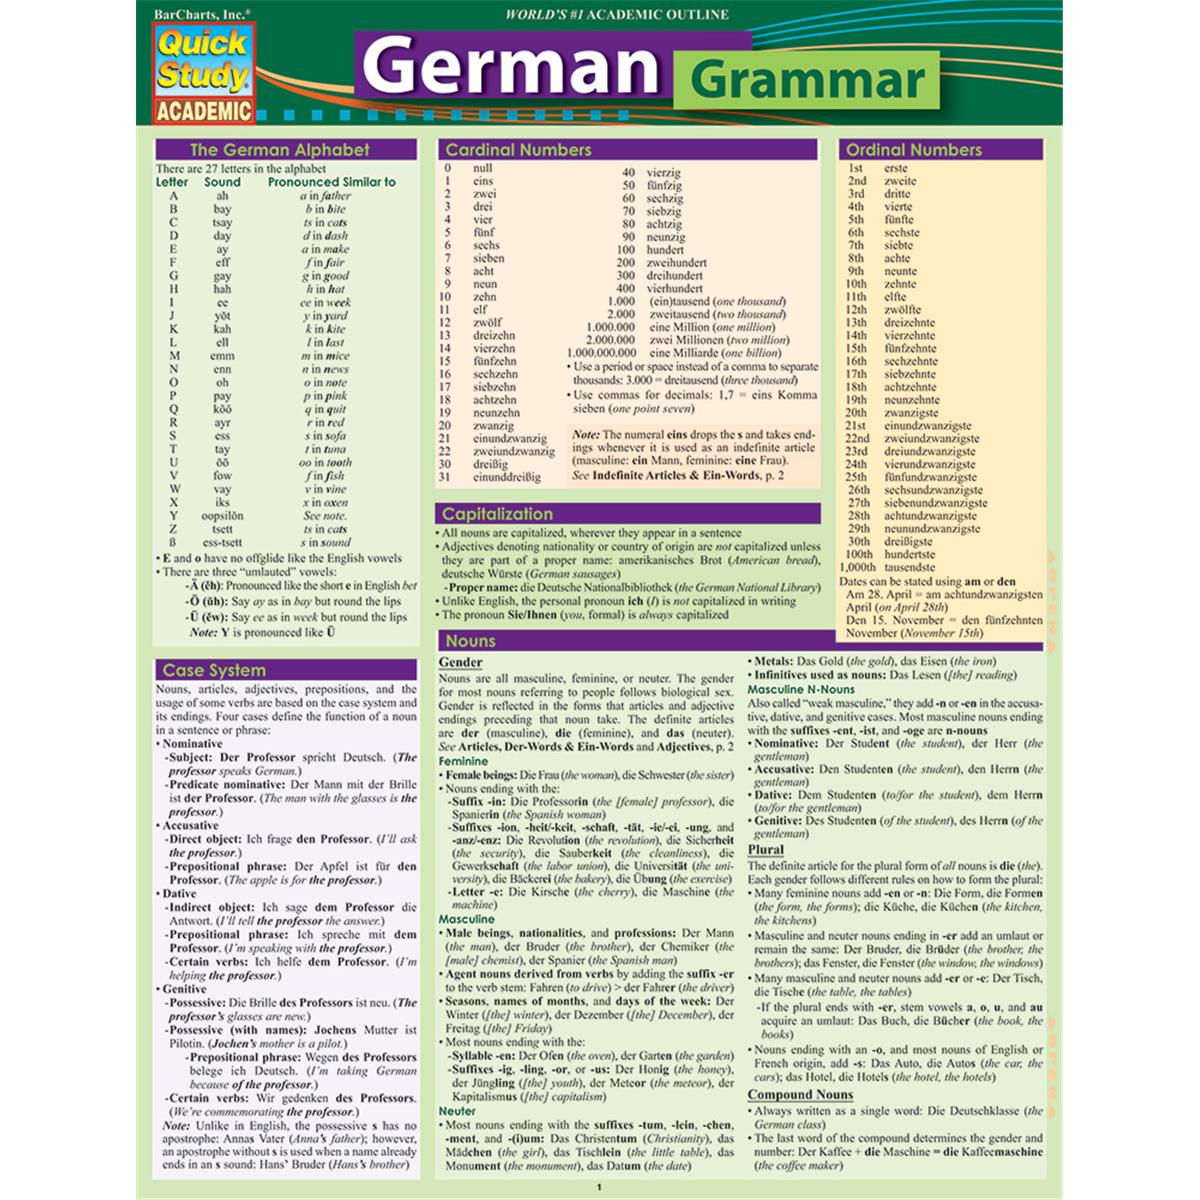 9781423234722 German Grammer Guide -  Barcharts Publishing